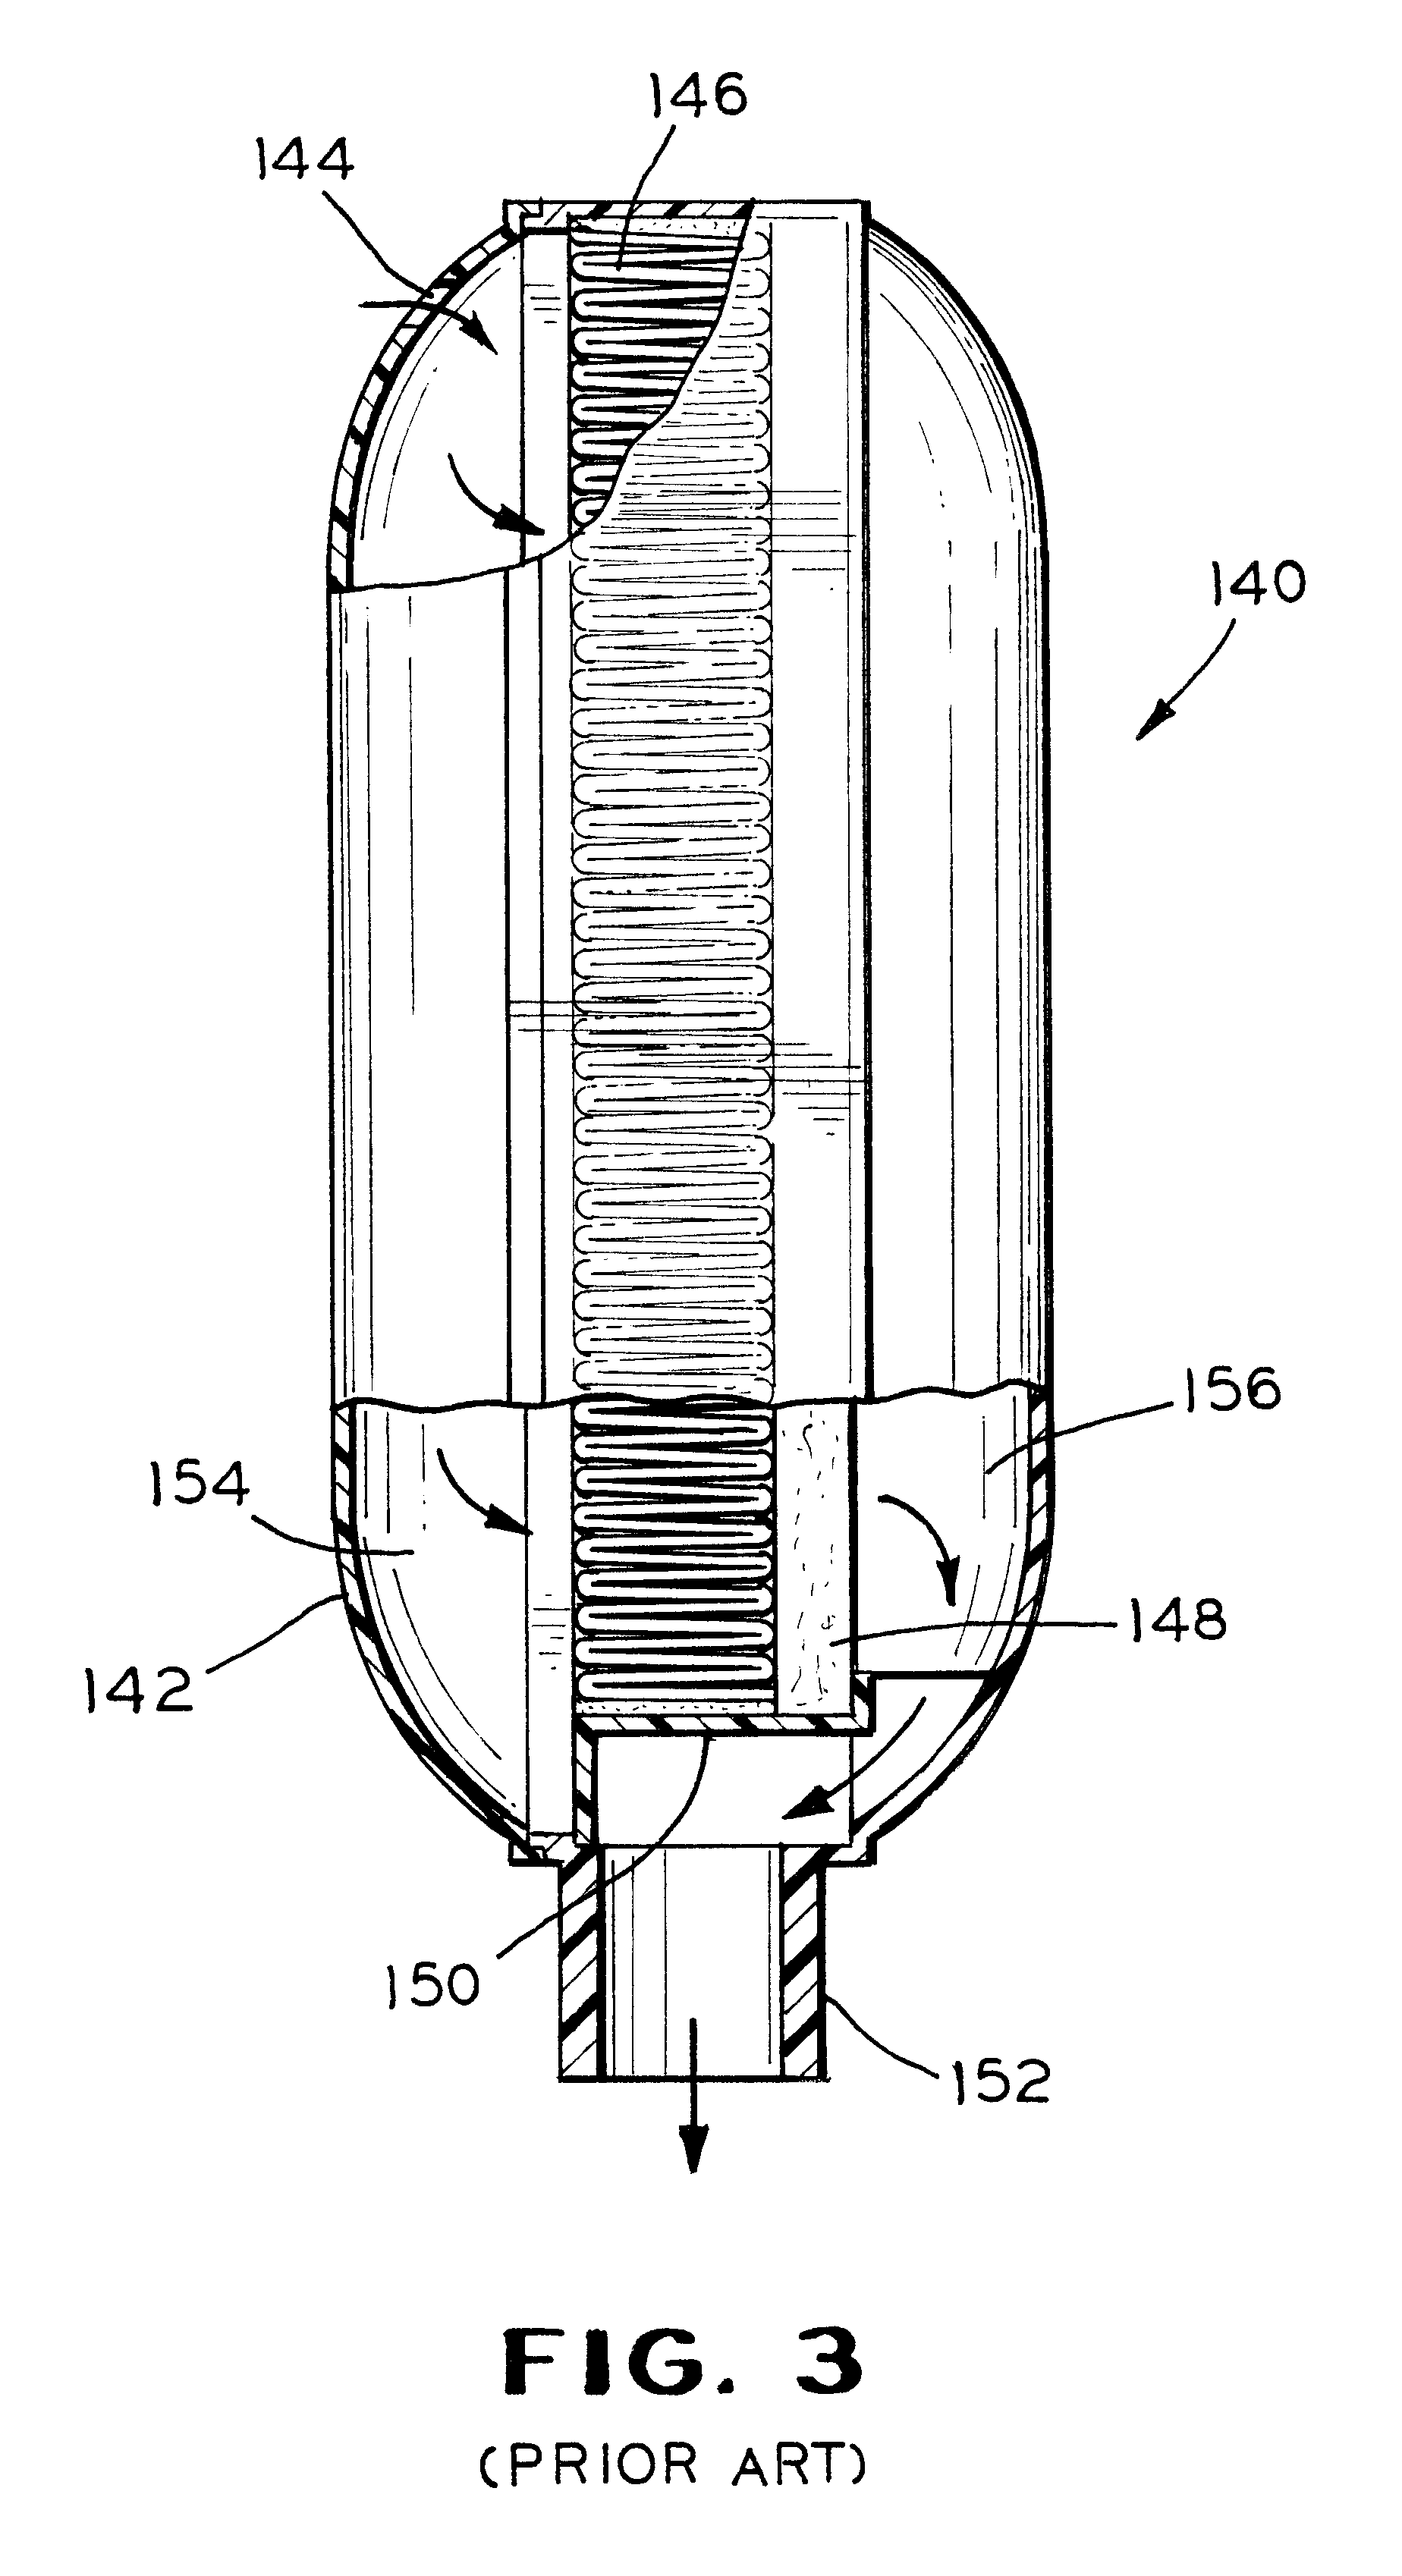 Inlet silencer/filter for an oxygen concentrator